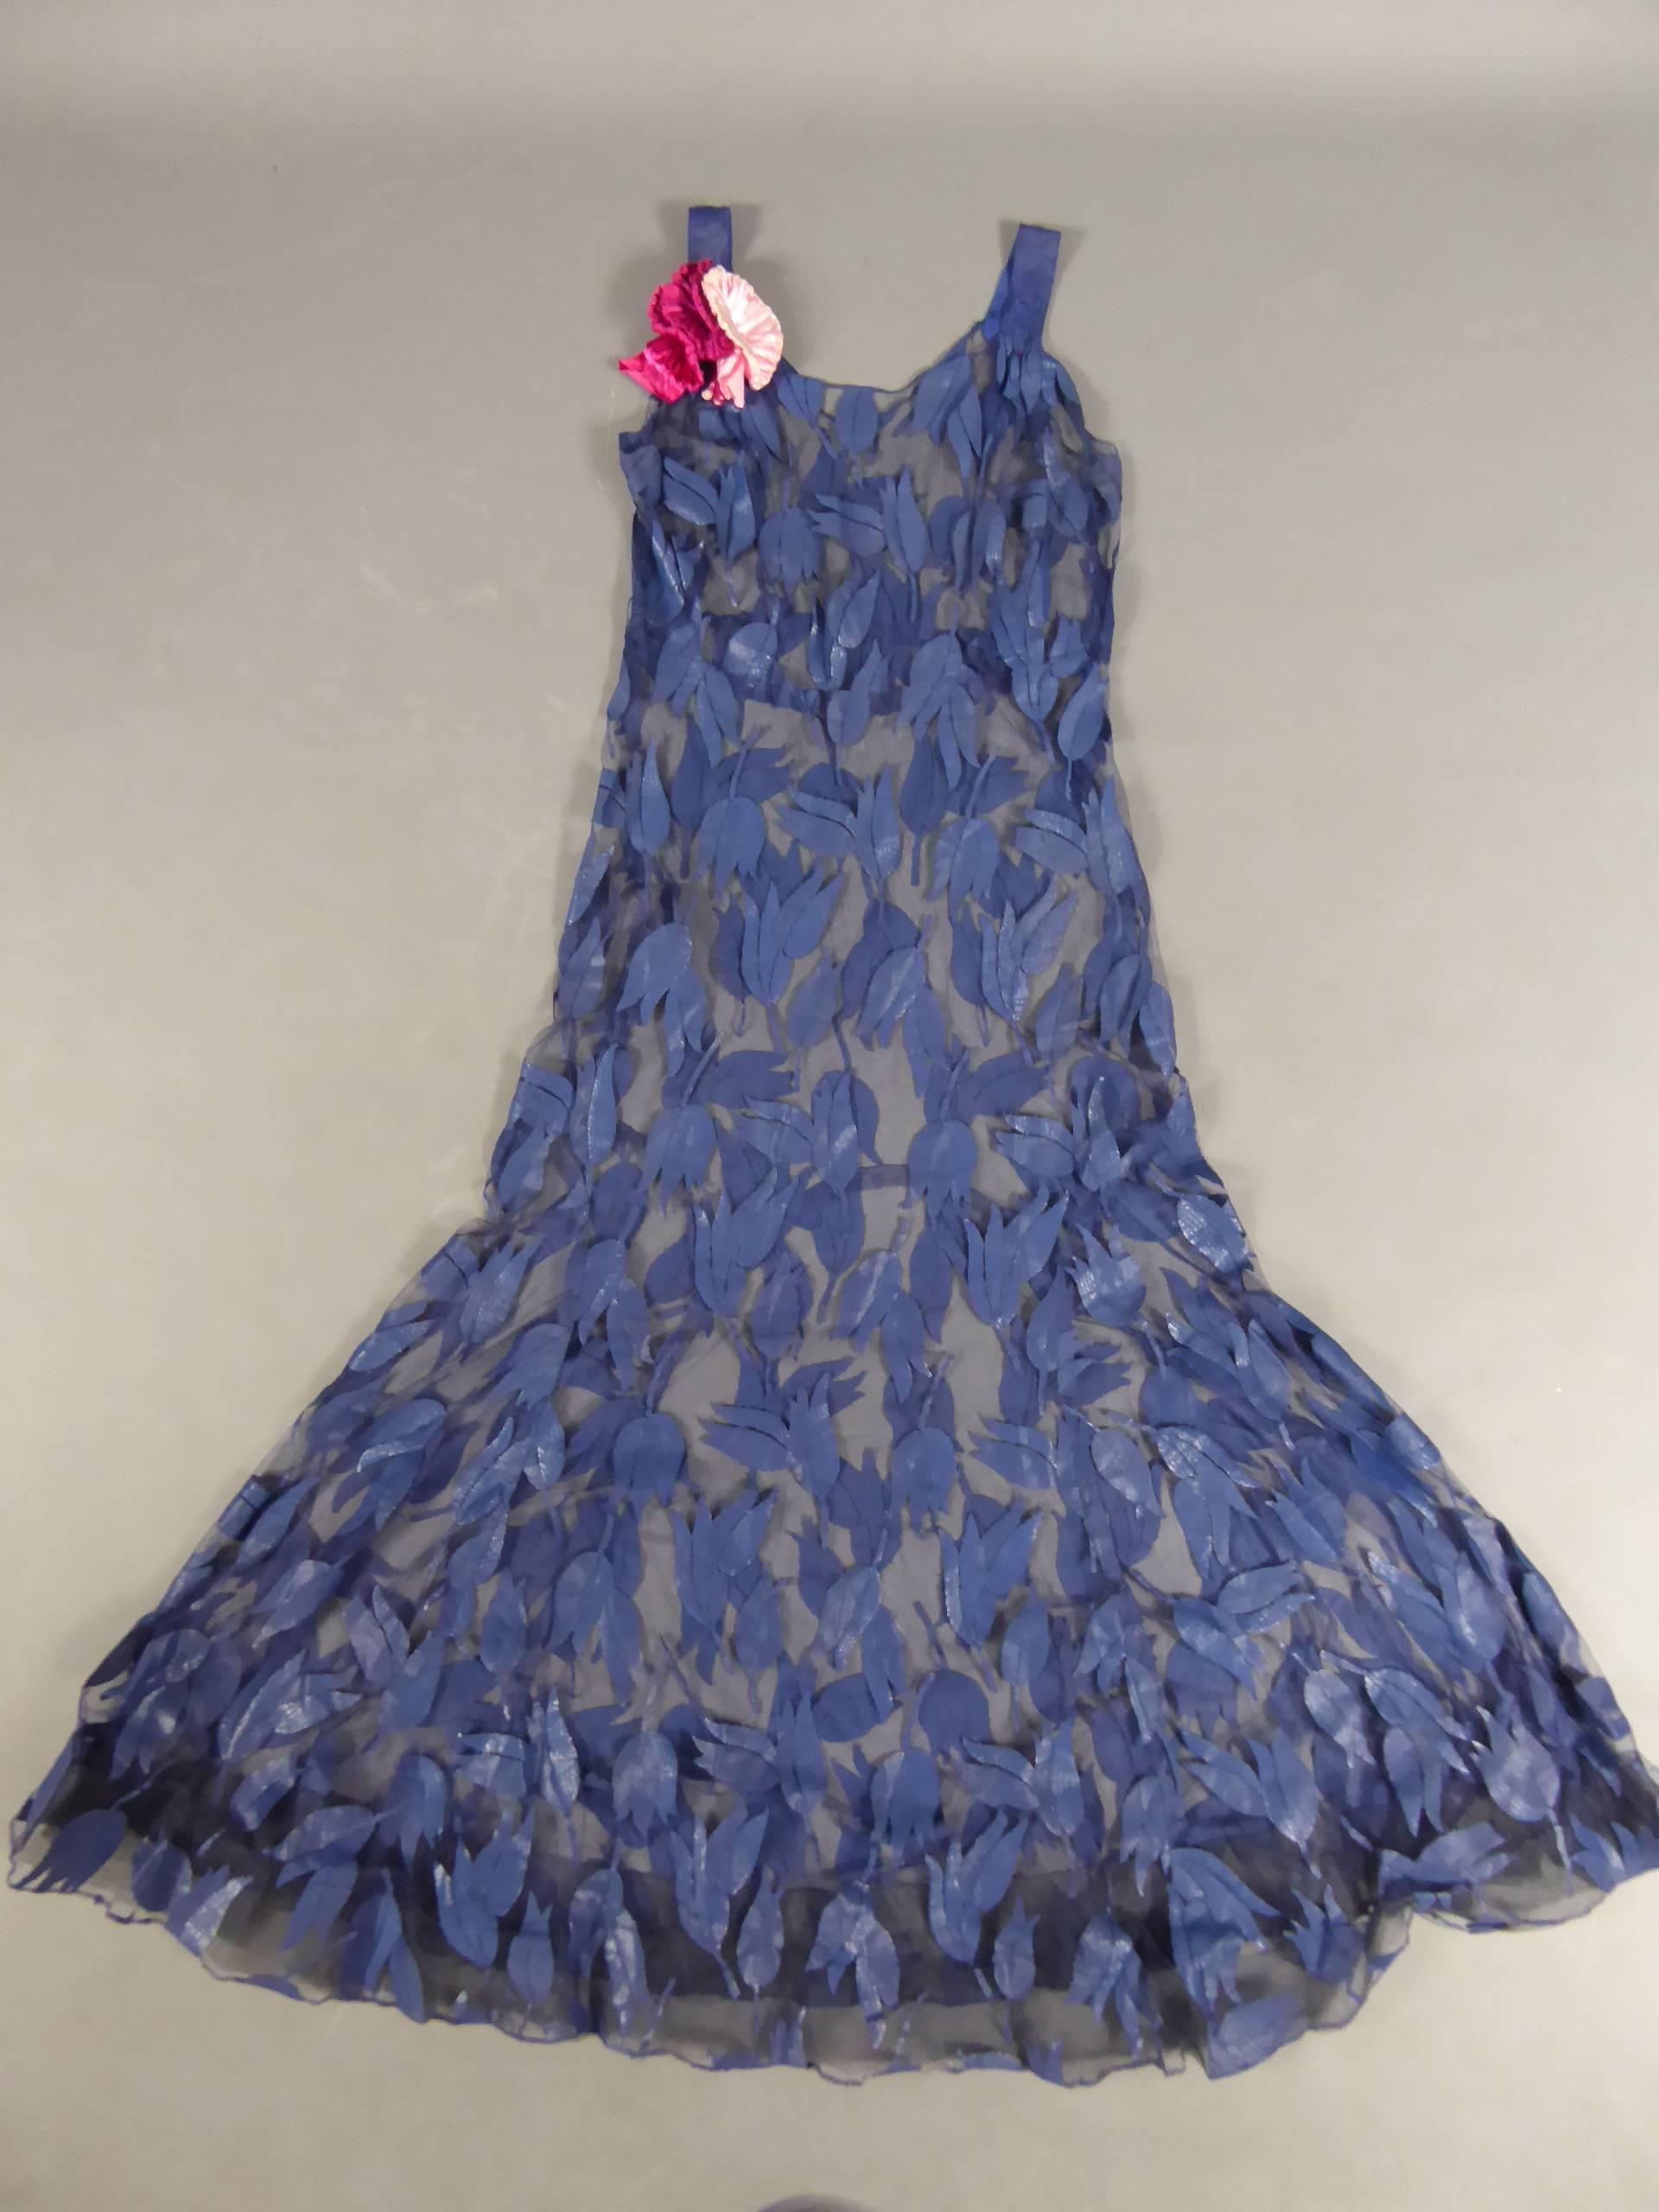 Circa1930 - 1940

 France

Deep blue tulle evening dress with tulips appliqué work from the years 1930- 1940. Reinforced bell skirt with a tulle rigid Bolduc for a fallen ruffled . Bouquet of artificial pink flowers on a shoulder. Two leg straps